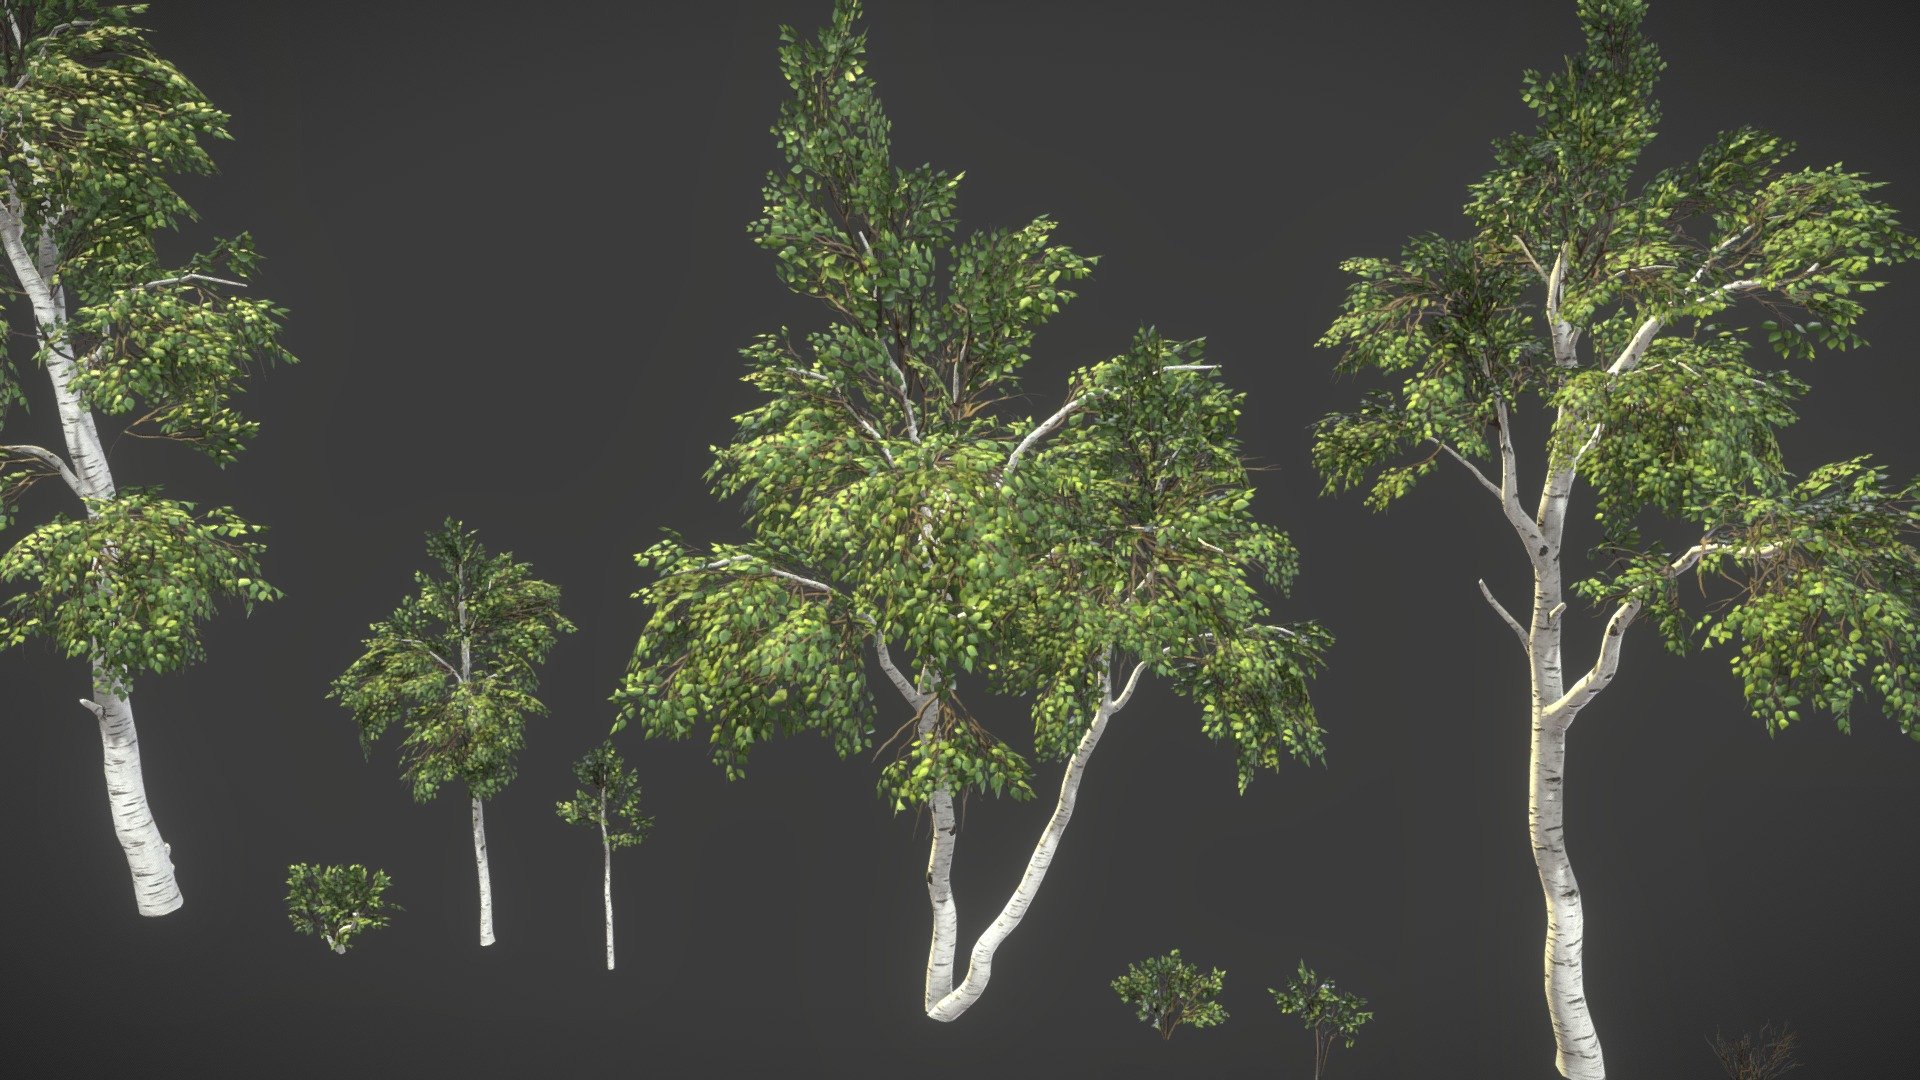 Meshes: 6 unique birch trees / 4 bushes use the same texture atlas
[*fbx/ Blender Scene]




SM_Plant_Tree_Birch_01 - 16999 tris

SM_Plant_Tree_Birch_02 - 17301 tris

SM_Plant_Tree_Birch_03 - 9380 tris

SM_Plant_Tree_Birch_04 - 23145 tris

SM_Plant_Tree_Birch_05 - 8492 tris

SM_Plant_Tree_Birch_06 - 1603 tris

SM_Plant_Bush_01 - 1277 tris

SM_Plant_Bush_02 - 1877 tris

SM_Plant_Bush_03 - 810 tris

SM_Plant_Bush_04 - 446 tris

Textures:




T_Plant Tree Birch Leaves _BCO/N/RTA - 2048x2048 *tga

T_Tree Bark Birch White _BC/N/RHA - 2048x4096 *tga

T_Tree Bark Birch Black _BC/N/RHA - 2048x4096 *tga

T_Tree Bark Patch _O - 512x1024 *tga






Vertex blended bark textures on the trunk (use two bark tiles textures for different bark material types for top and bottom tree) - see the Blender scene setup

Wind Vertex painted

Collision

Lightmaps
 - Birch Pack - 3D model by letsmakecoolart (@seriouscat) 3d model